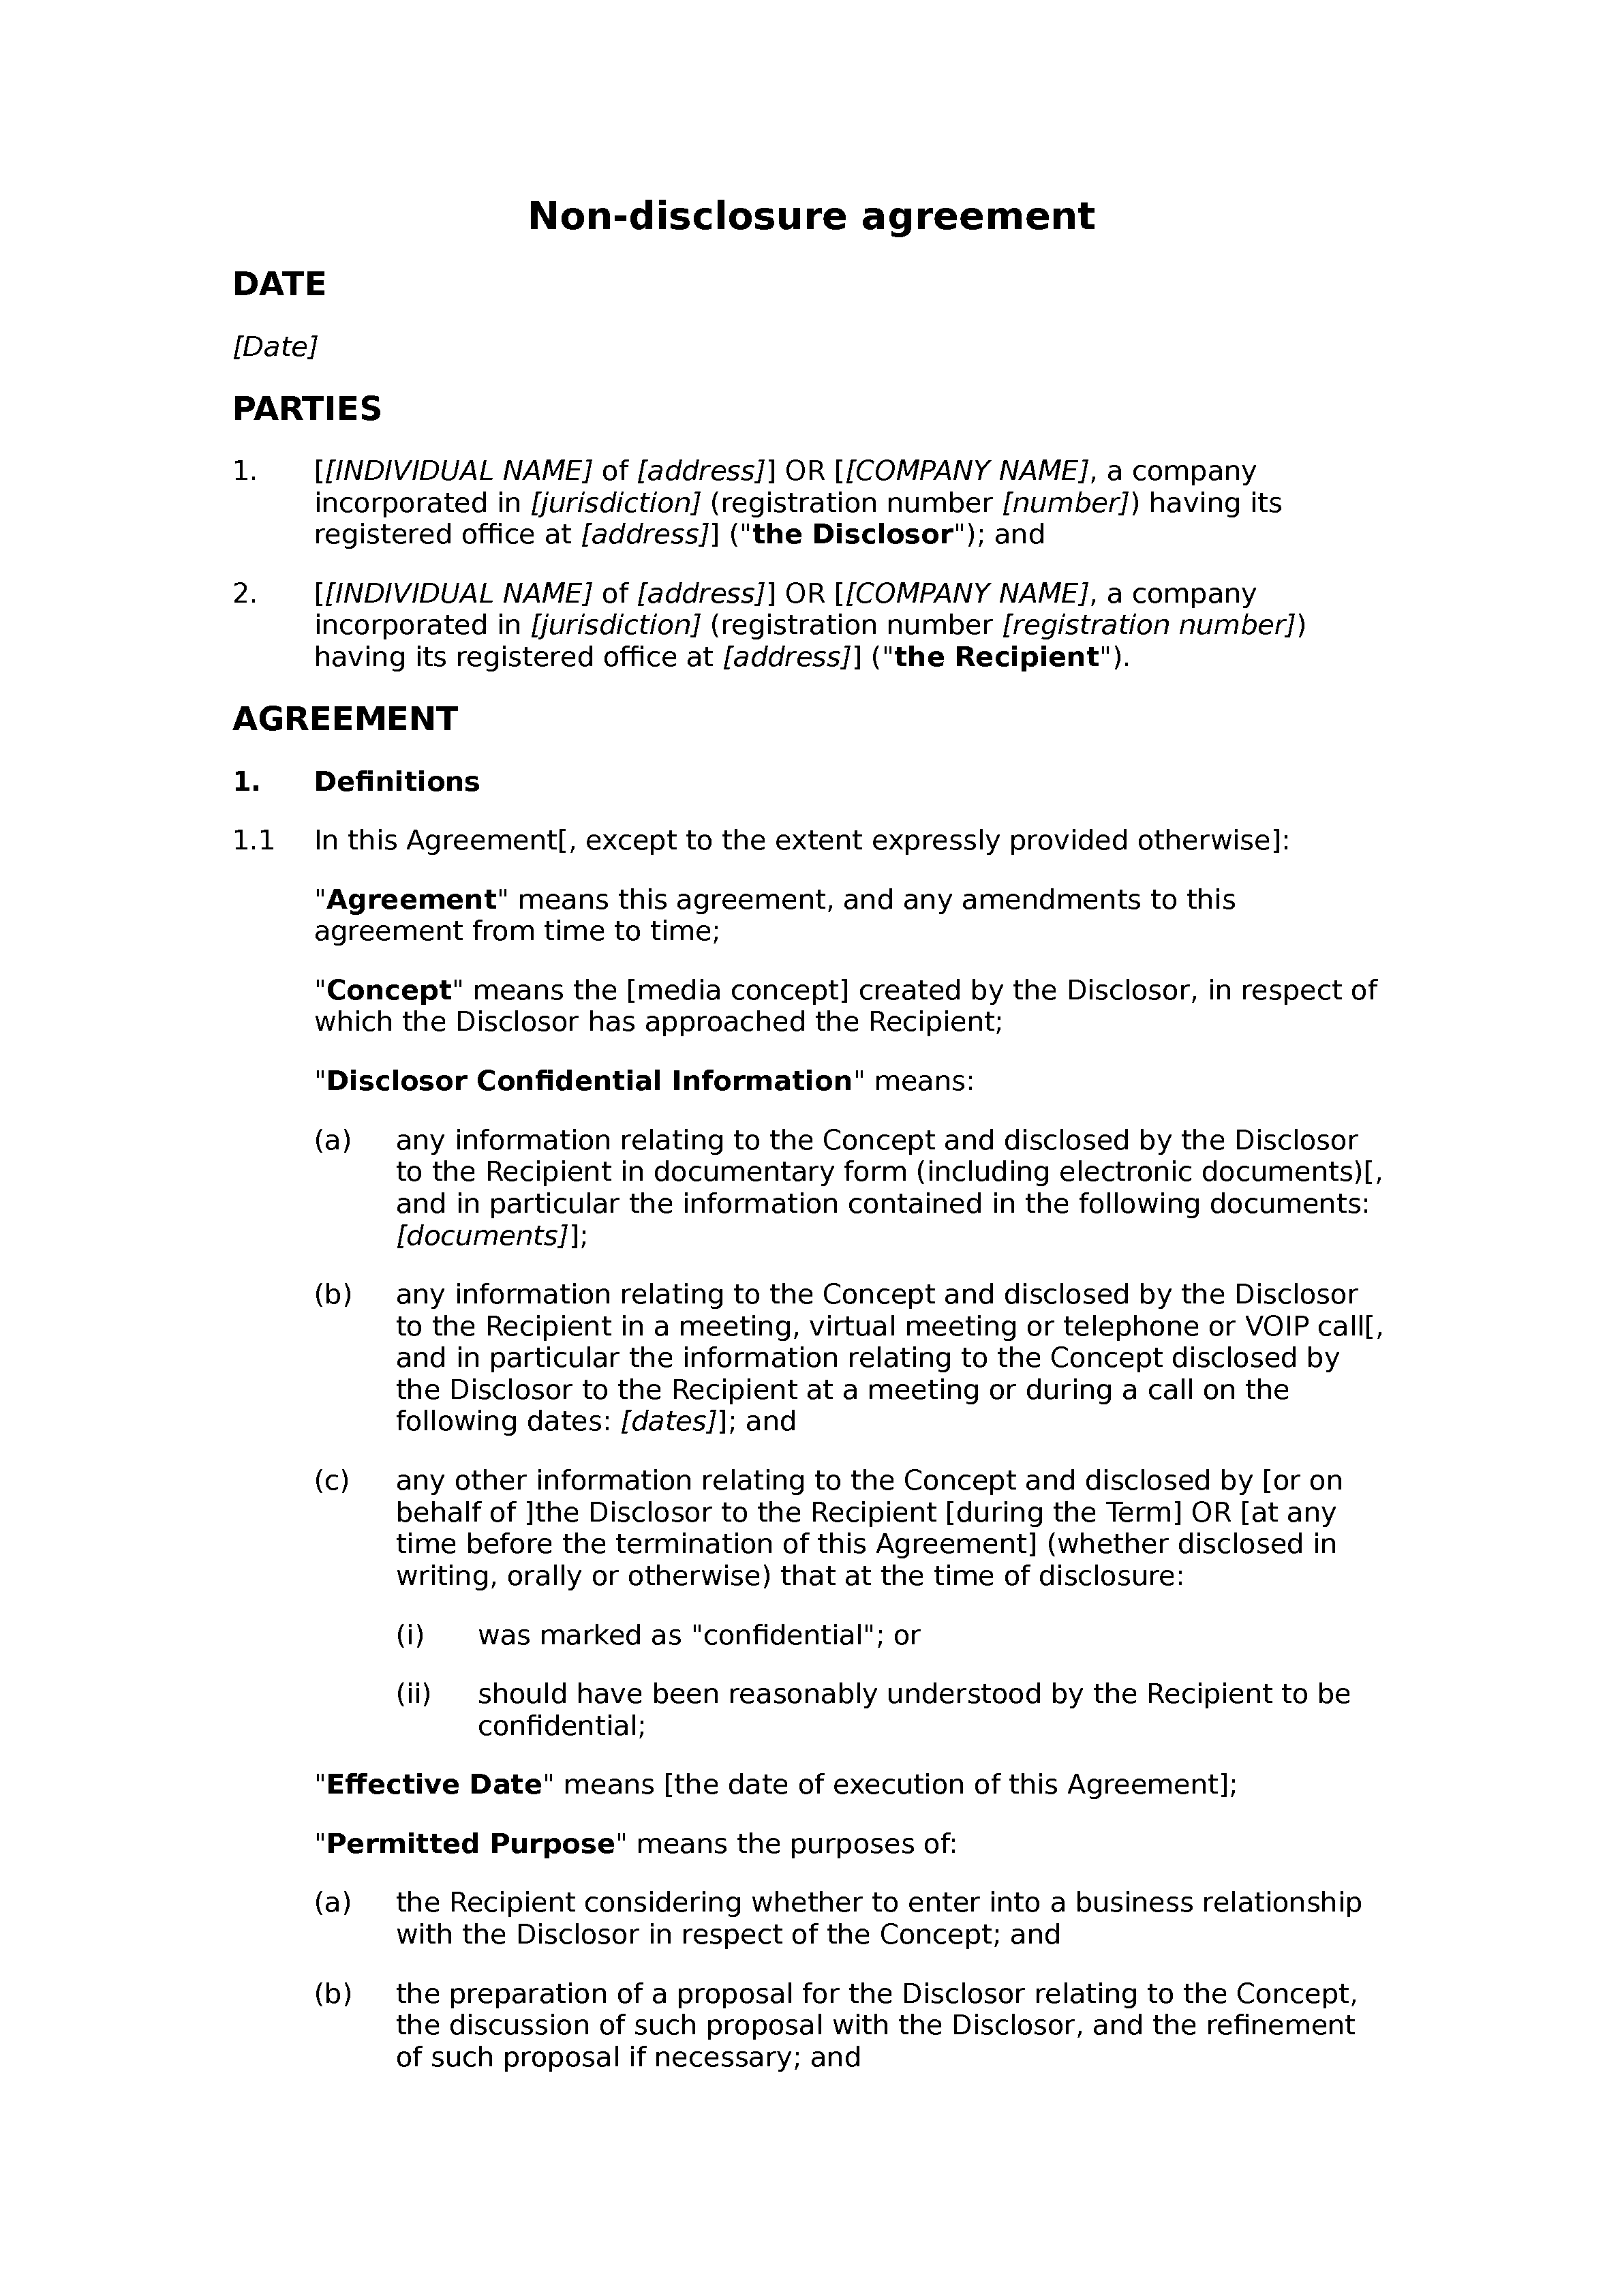 Non-disclosure agreement (media concept) document preview